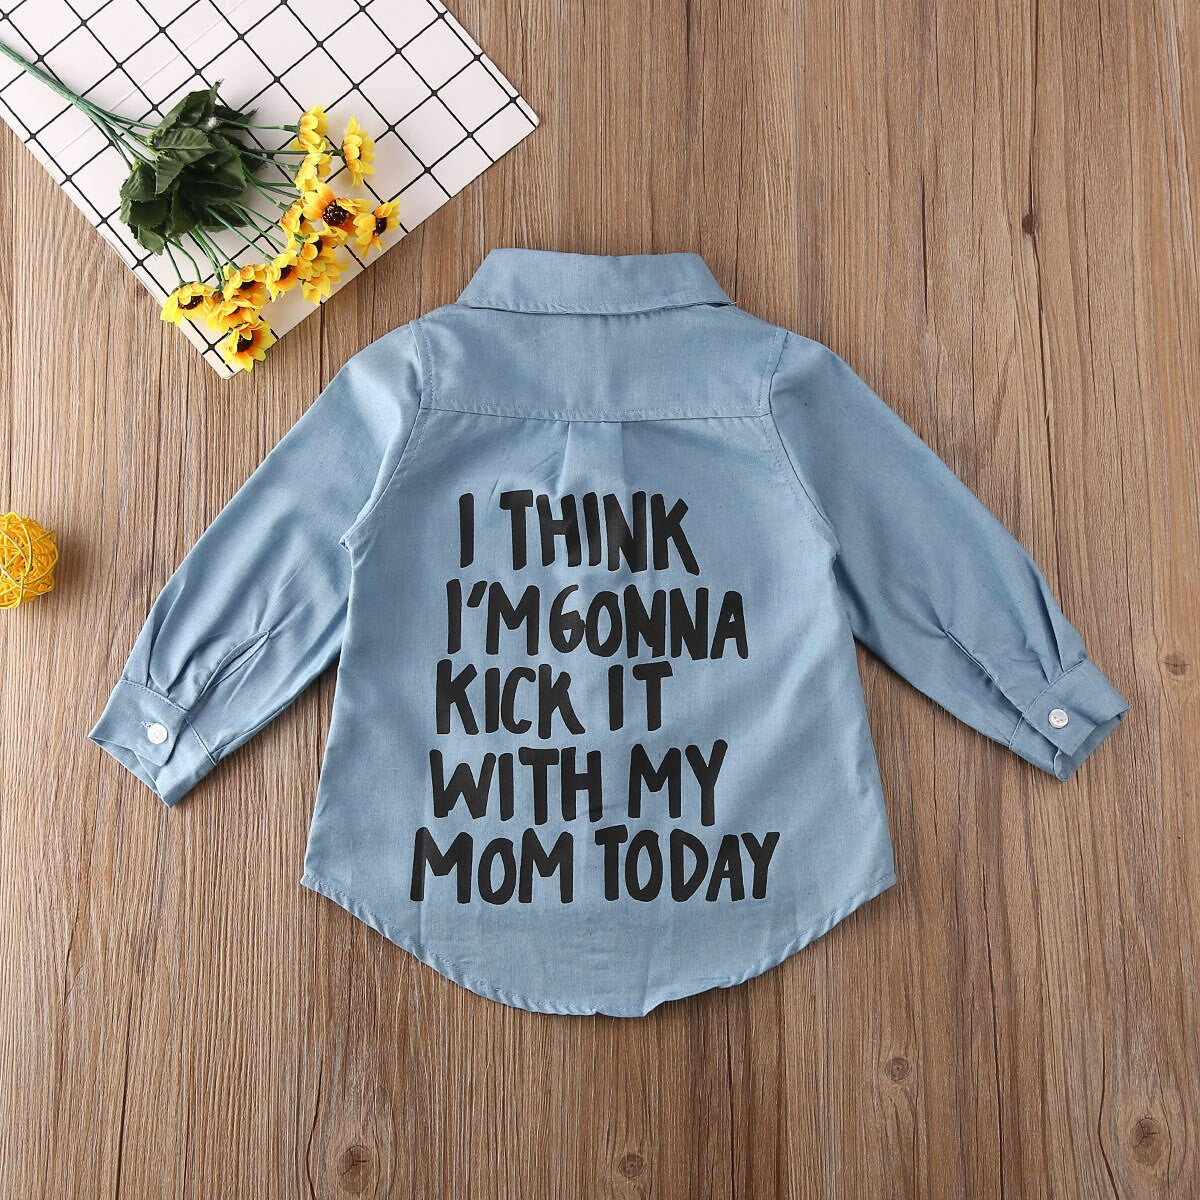 'I think I'm gonna kick it with my mom today' Jean Shirt